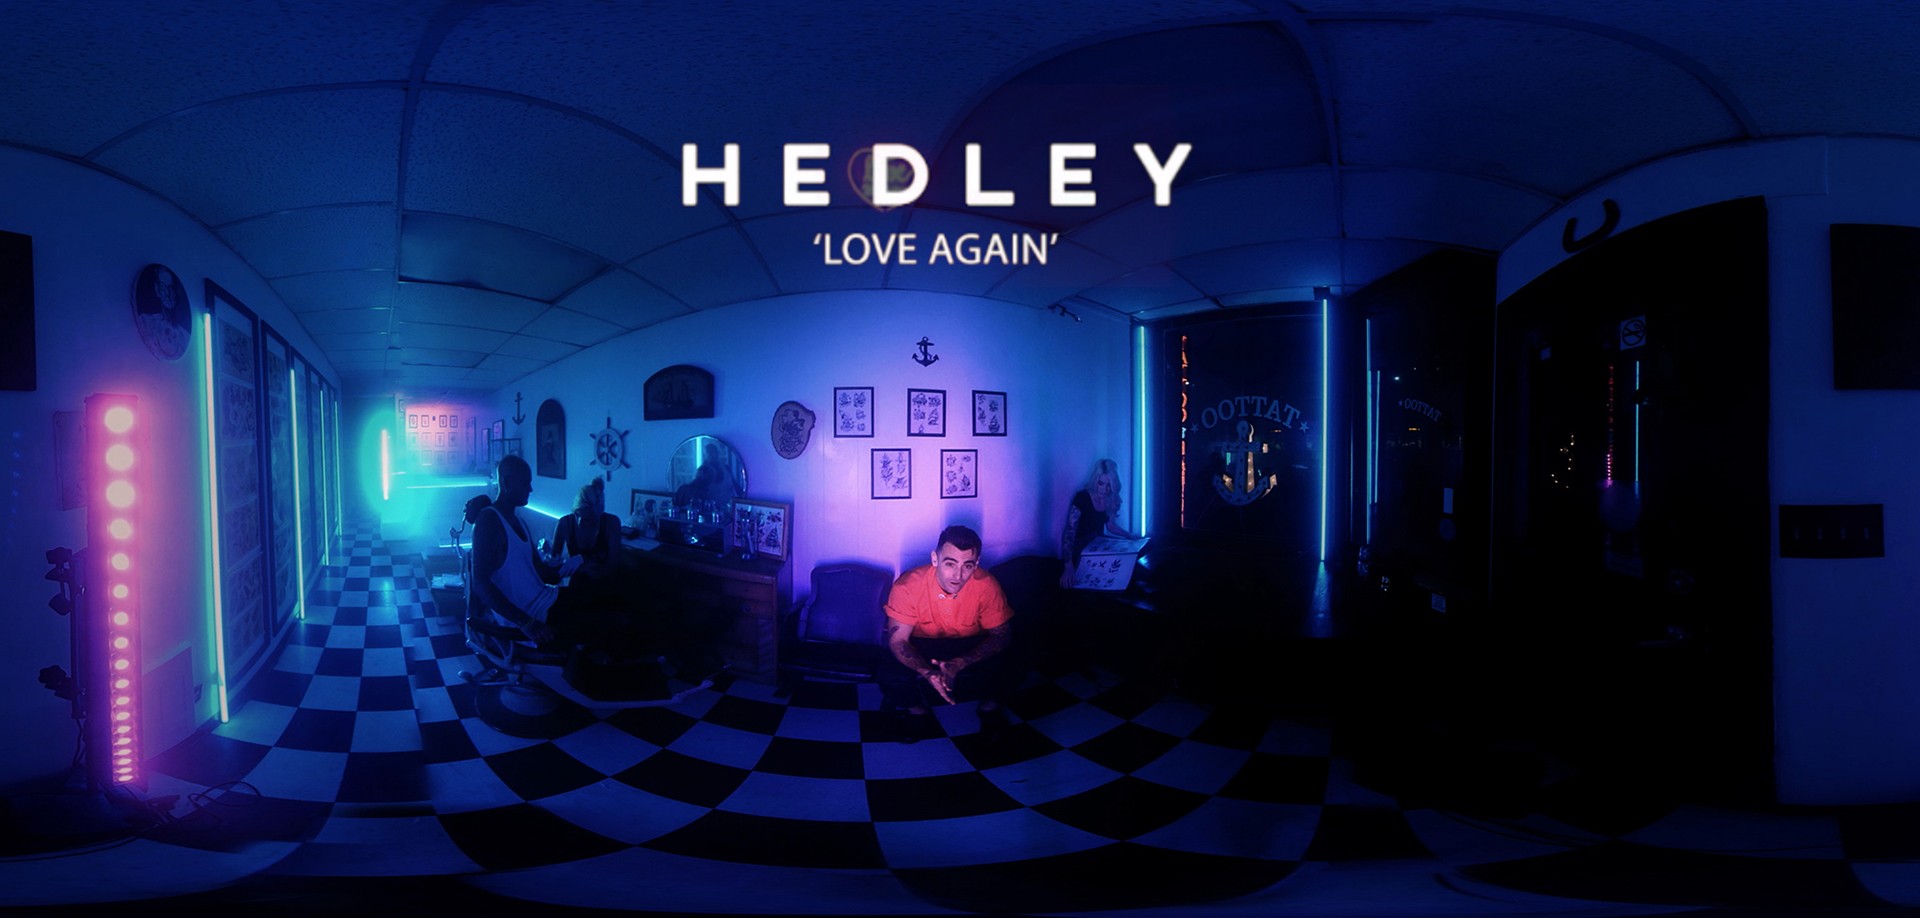 Hedley – Love Again | 360 Music Video | Mantra VR